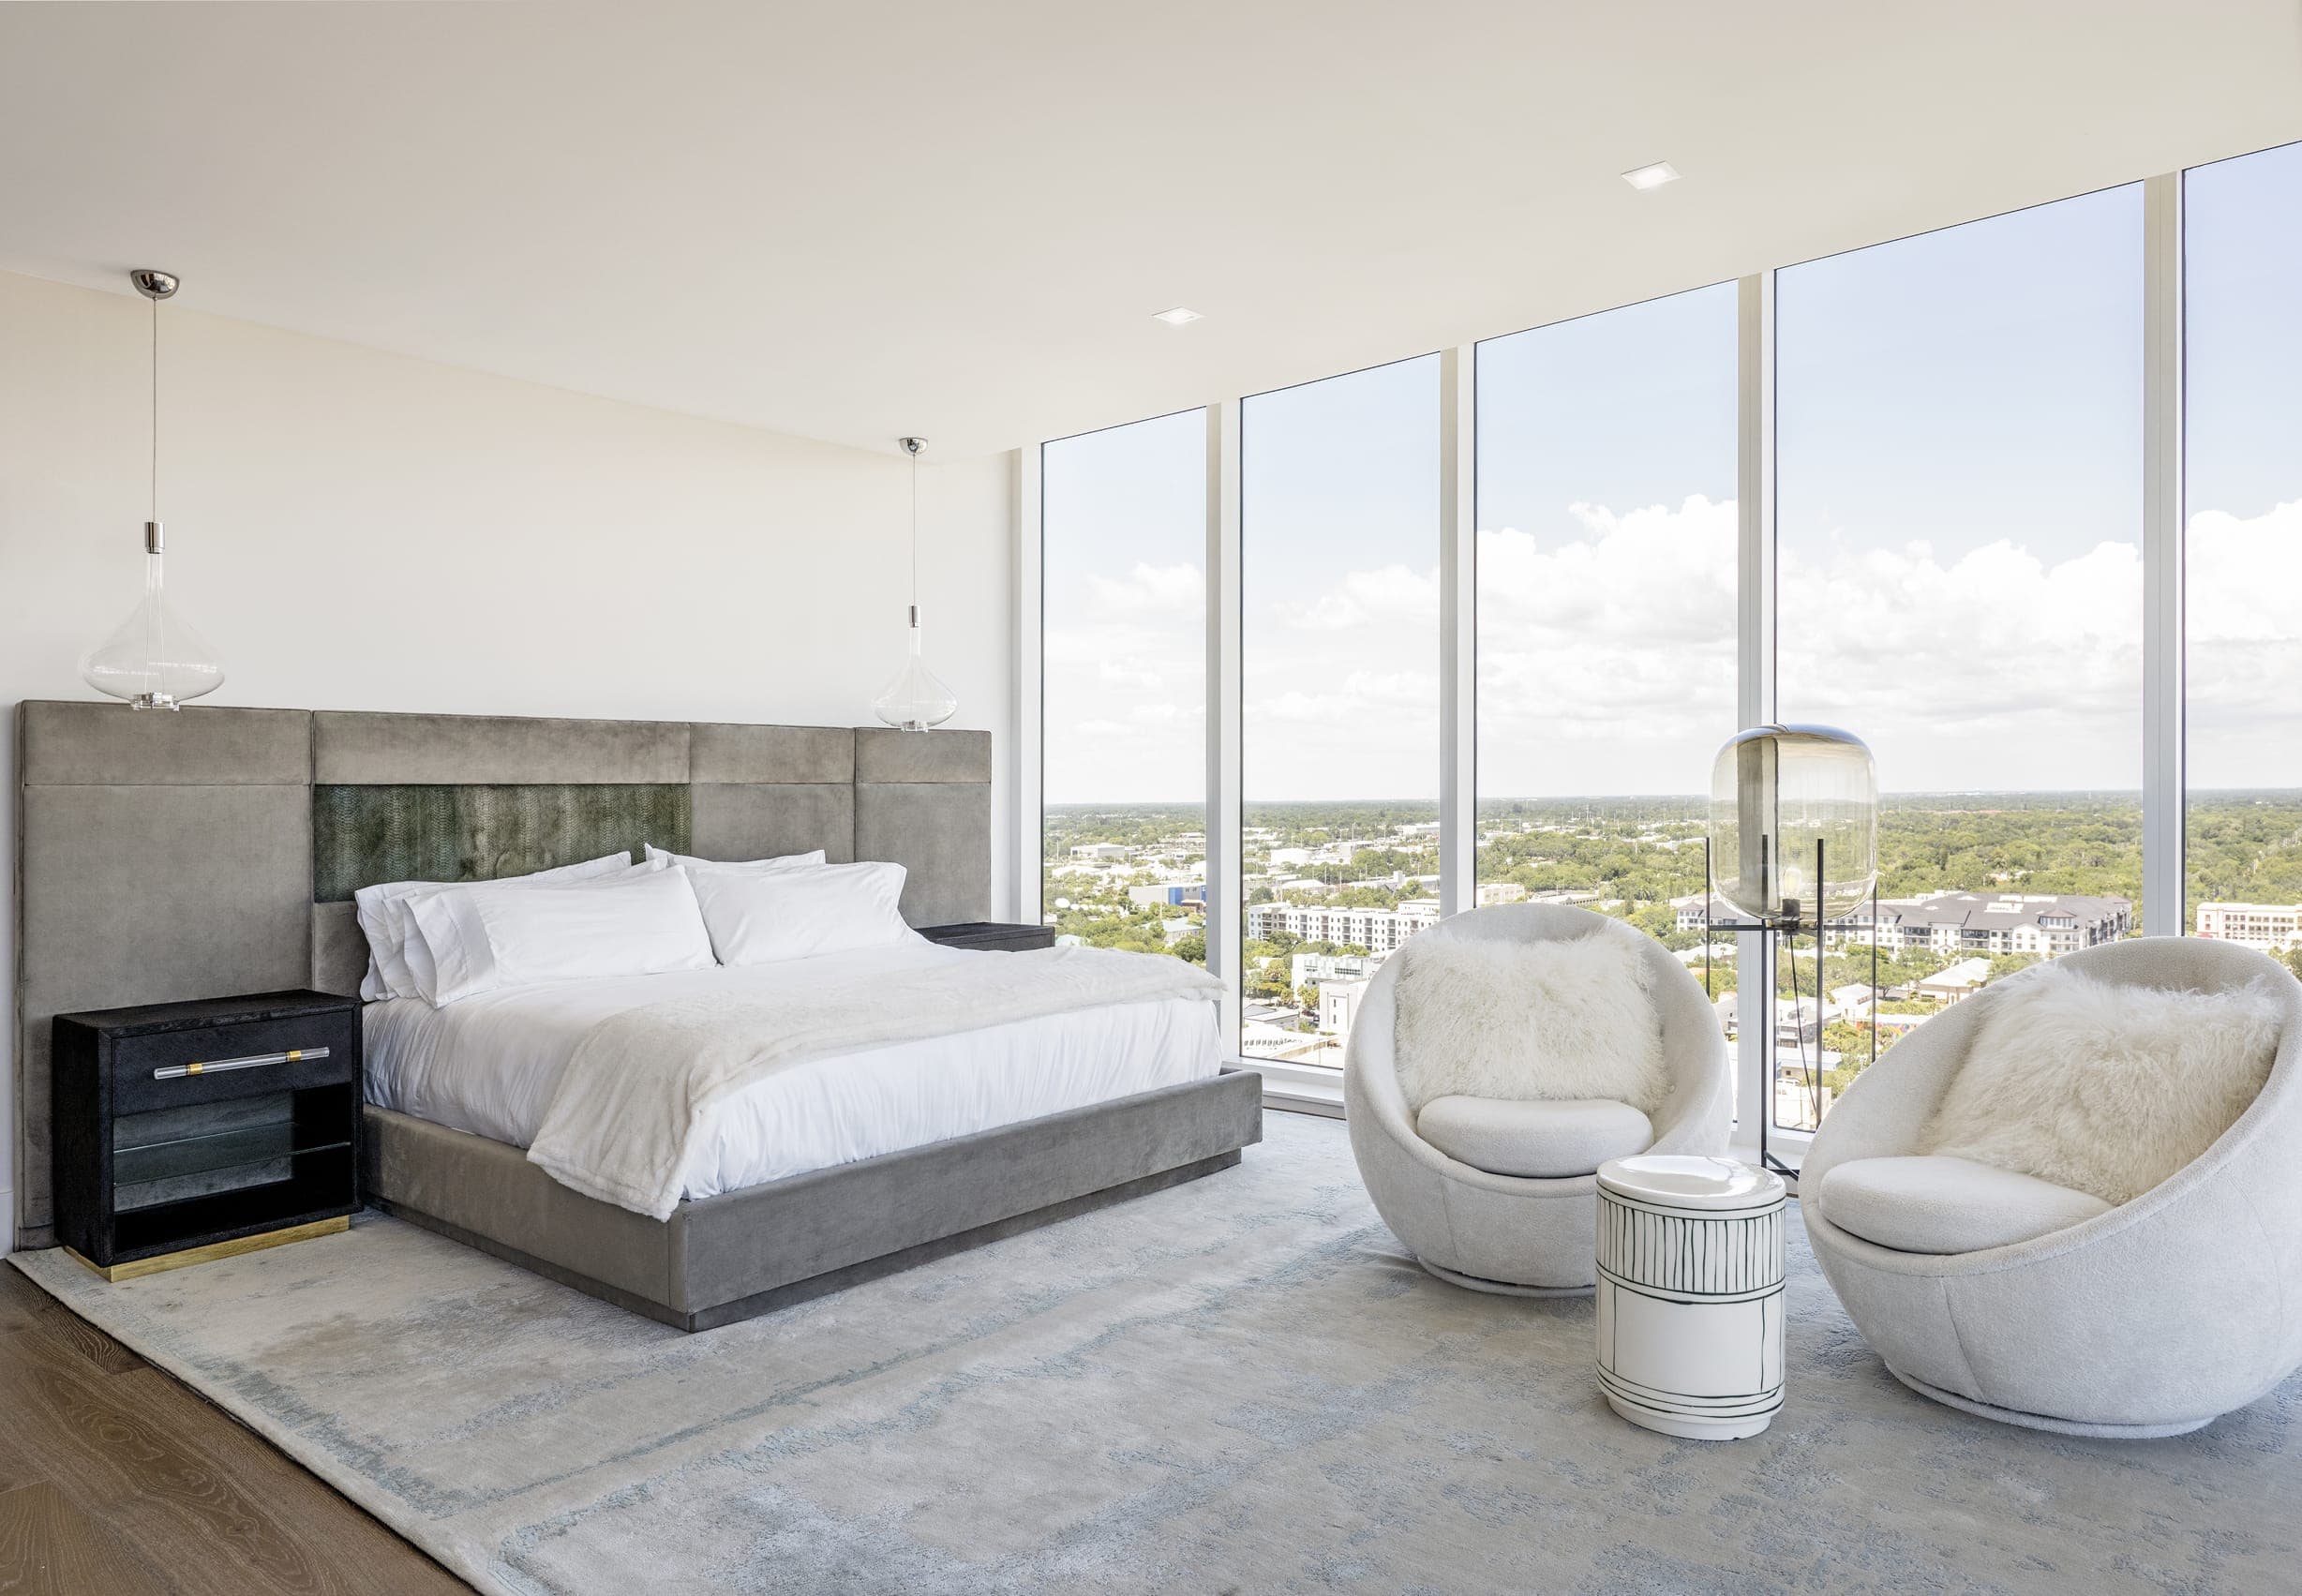 Jkl Penthouse The Blvd Contemporary White Master Bedroom